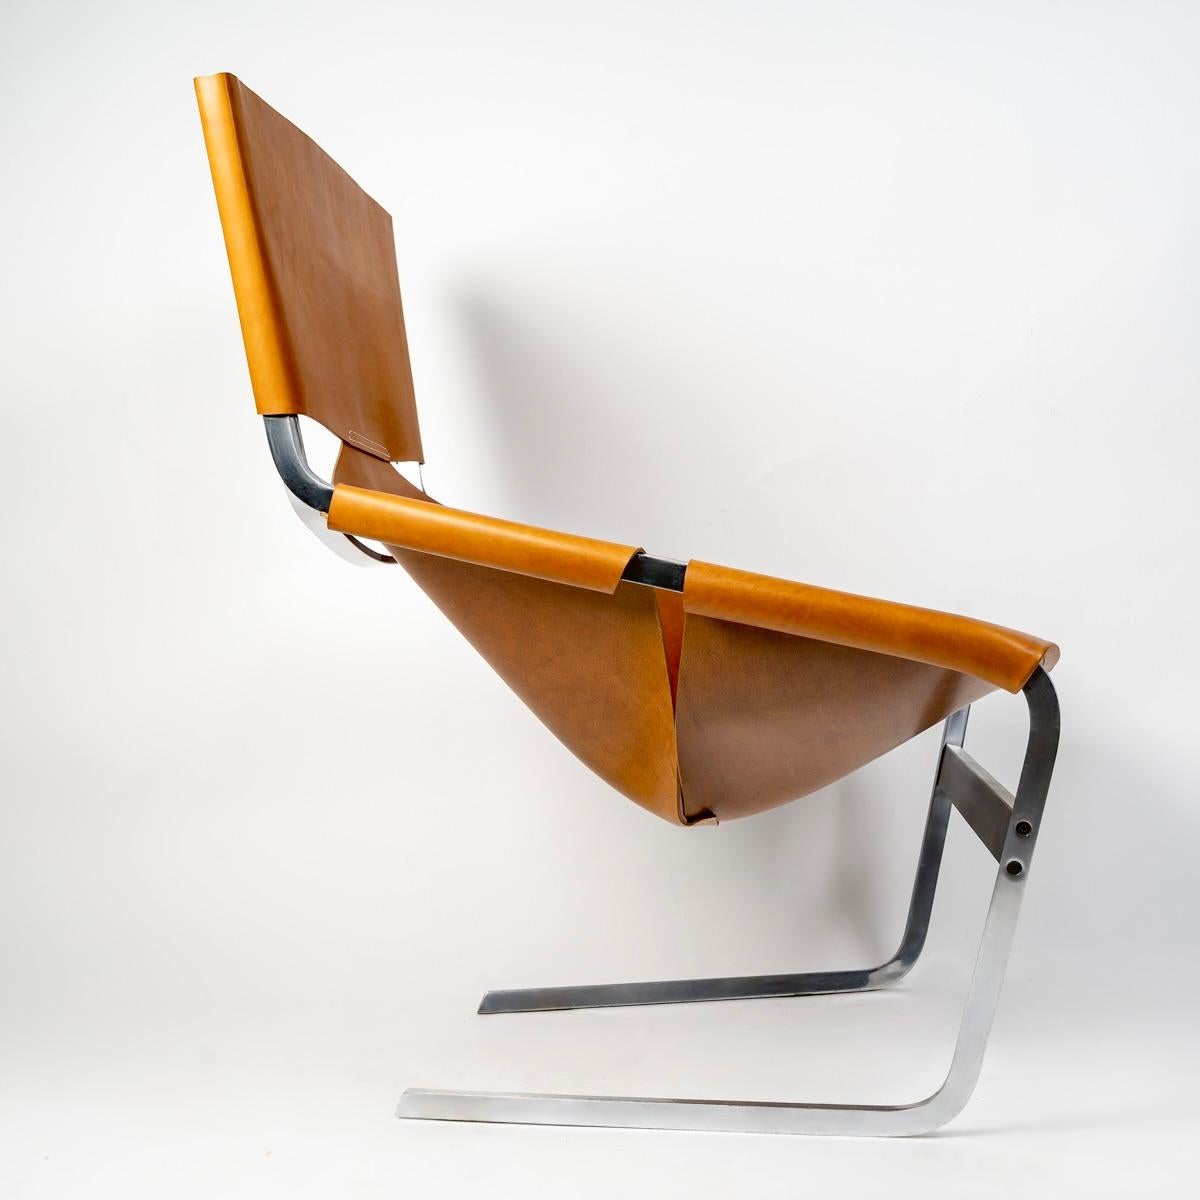 Original pair of model F444 lounge chairs designed by Pierre Paulin and manufactured by Artifort in 1963.
The armchairs feature a sturdy steel frame upholstered in beautiful cognac-colored leather (the cover has been redone identically).
The high